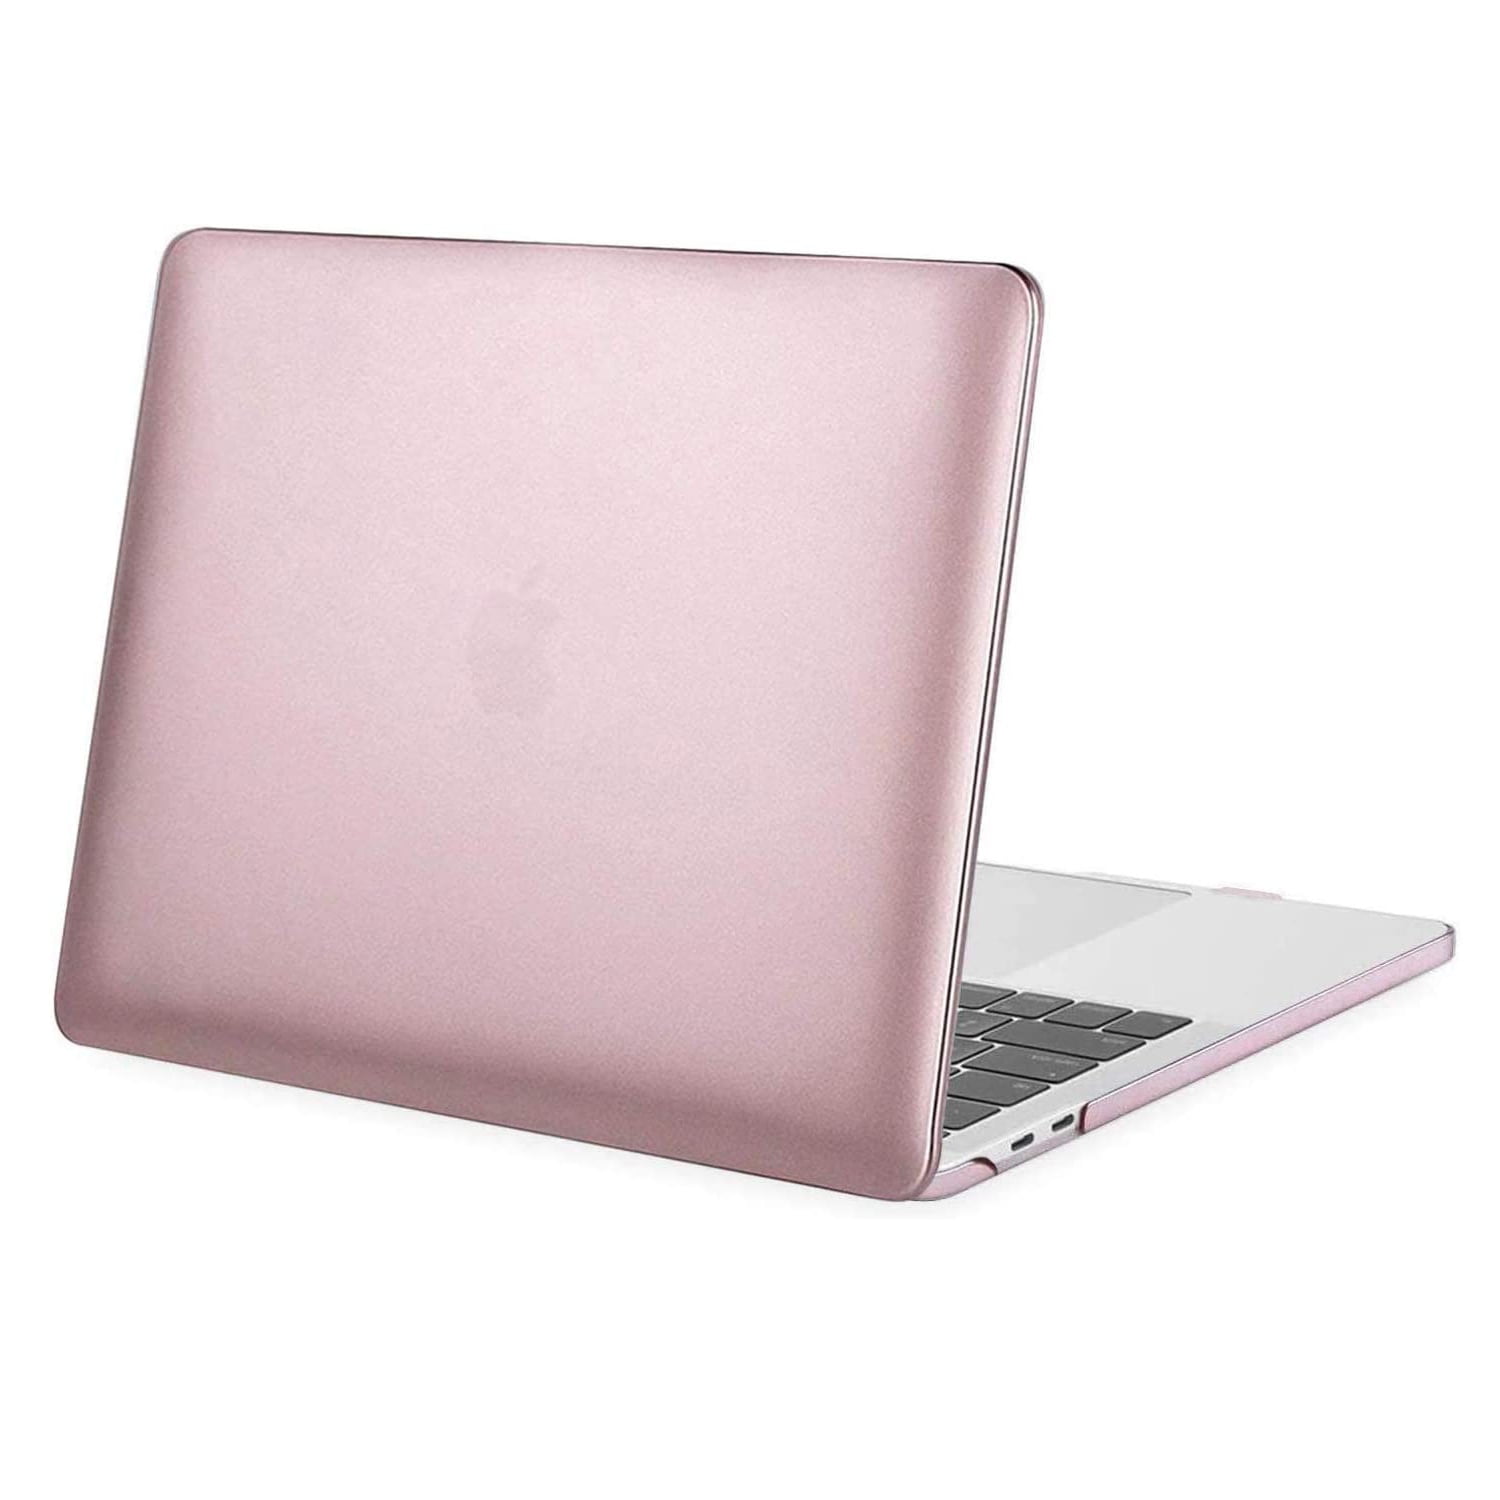 Macbookpro Case School Bag Children Backpack Ideas Plastic Hard Shell Compatible Mac Air 11 Pro 13 15 Case for Mac Protection for MacBook 2016-2019 Version 